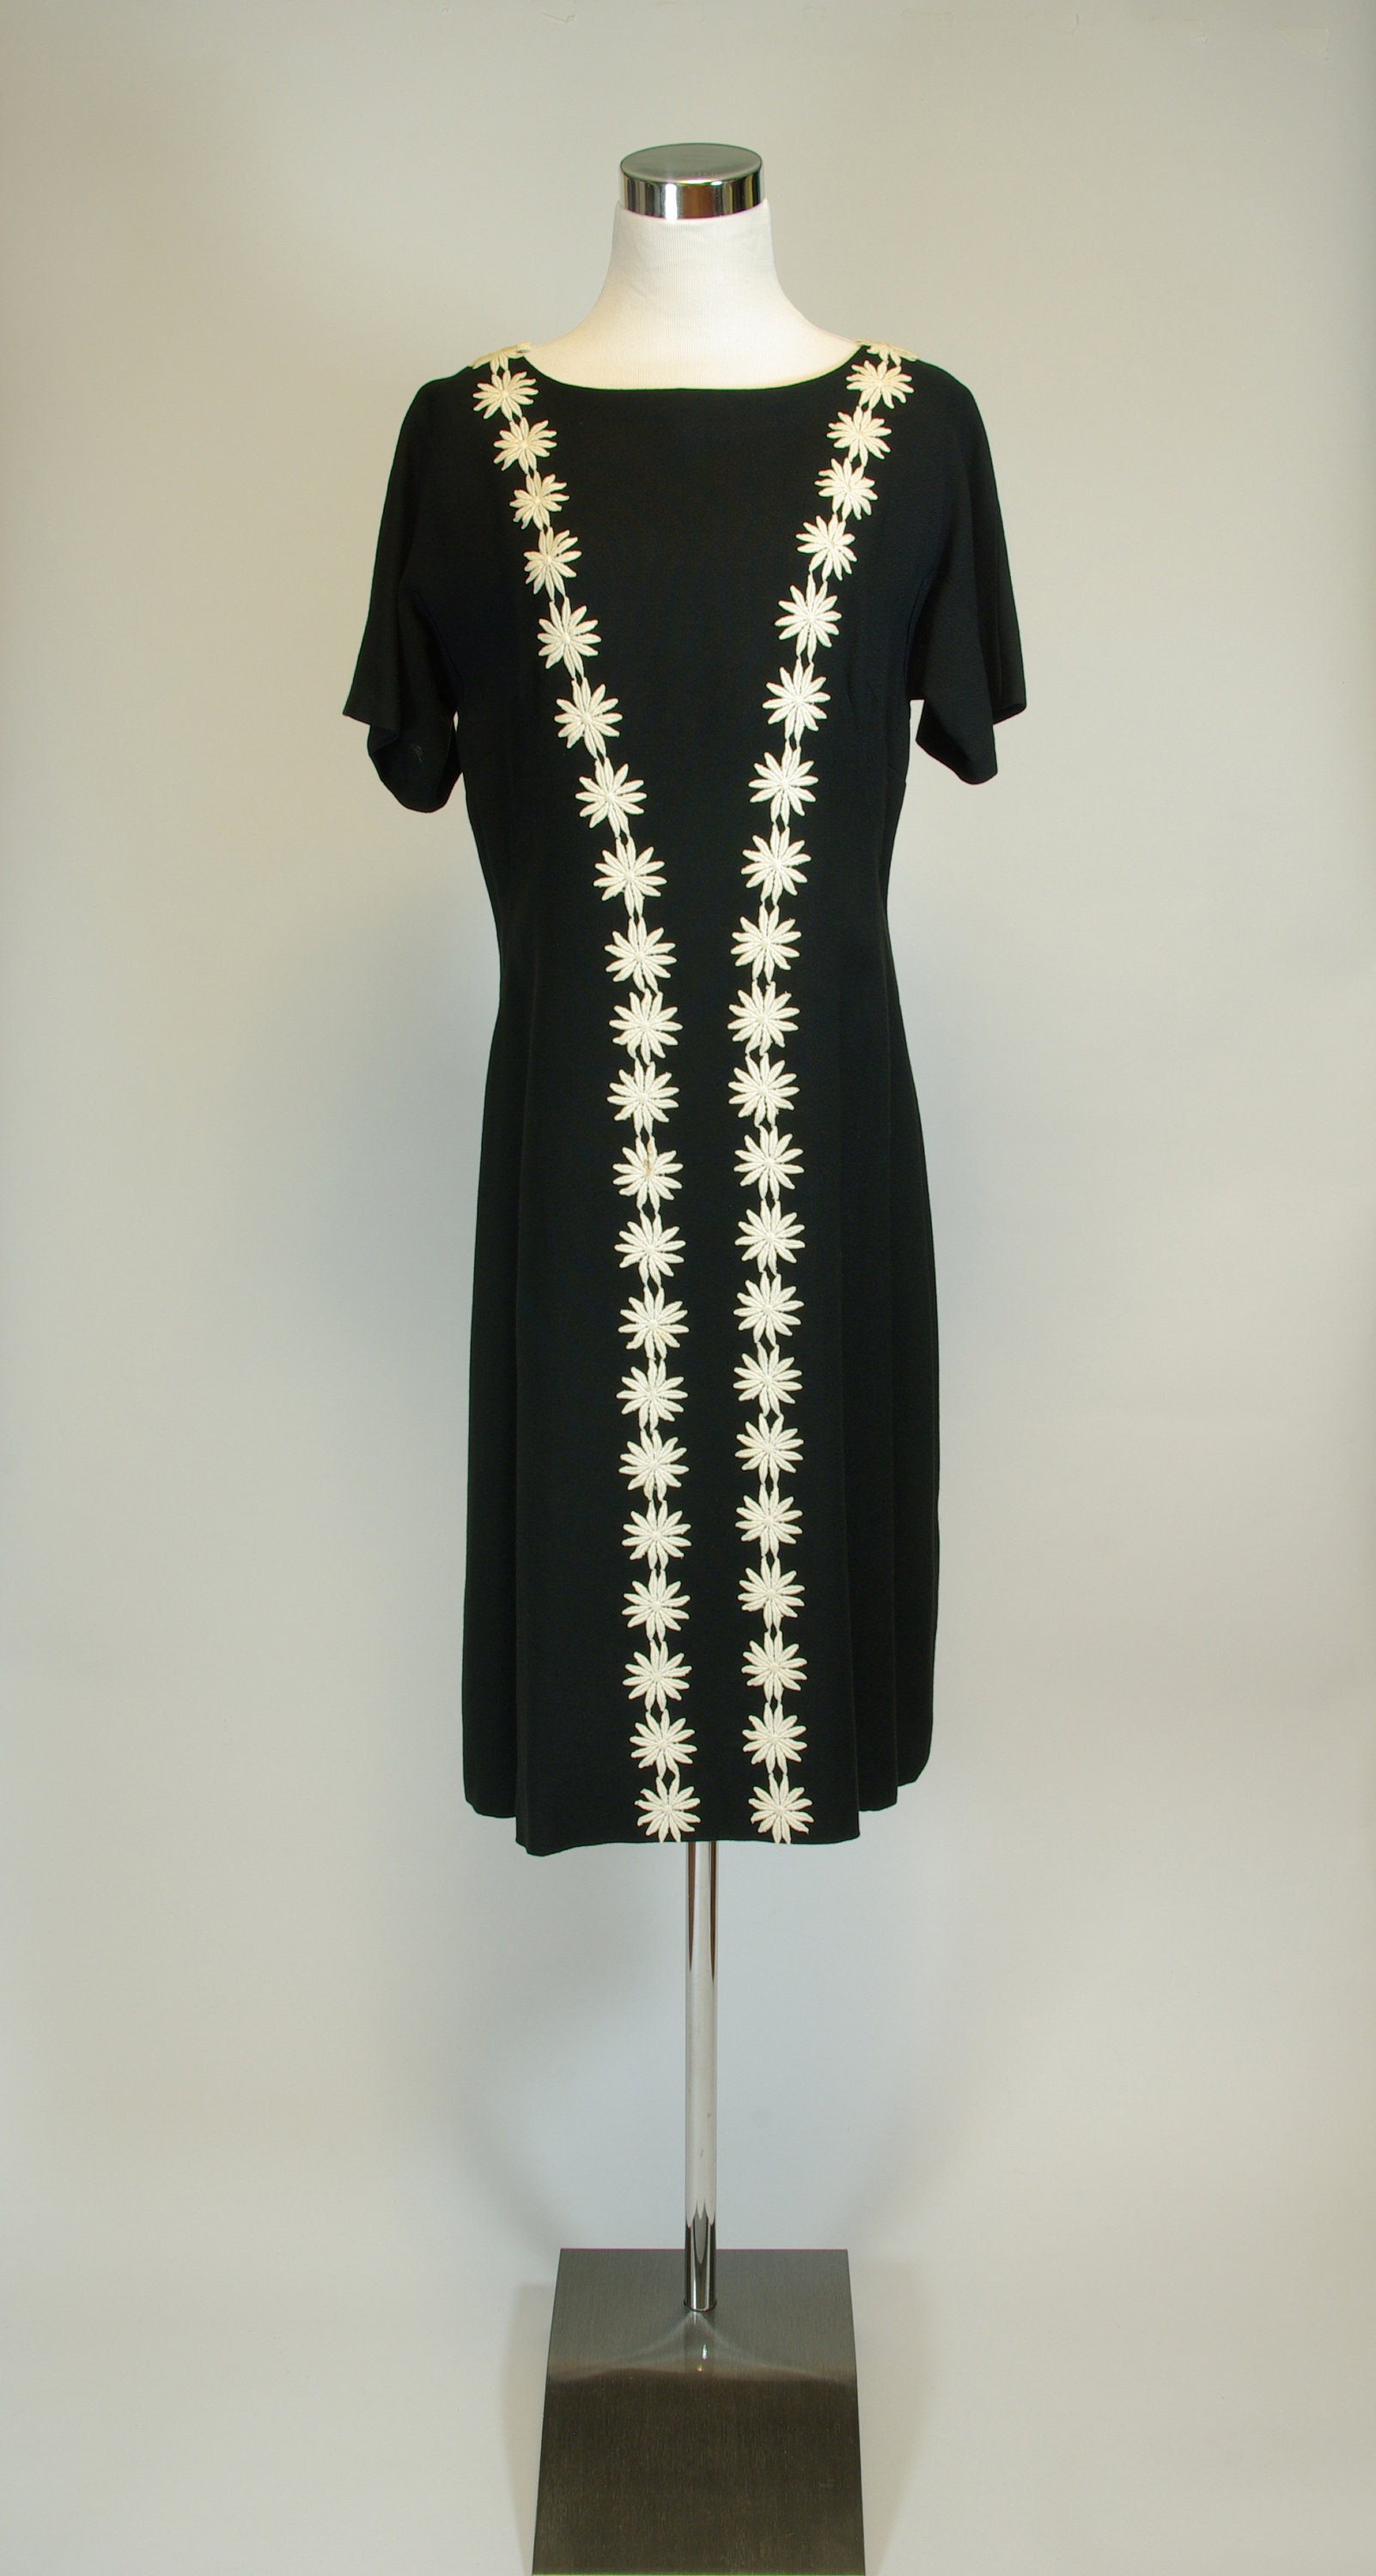 black dress with white daisies